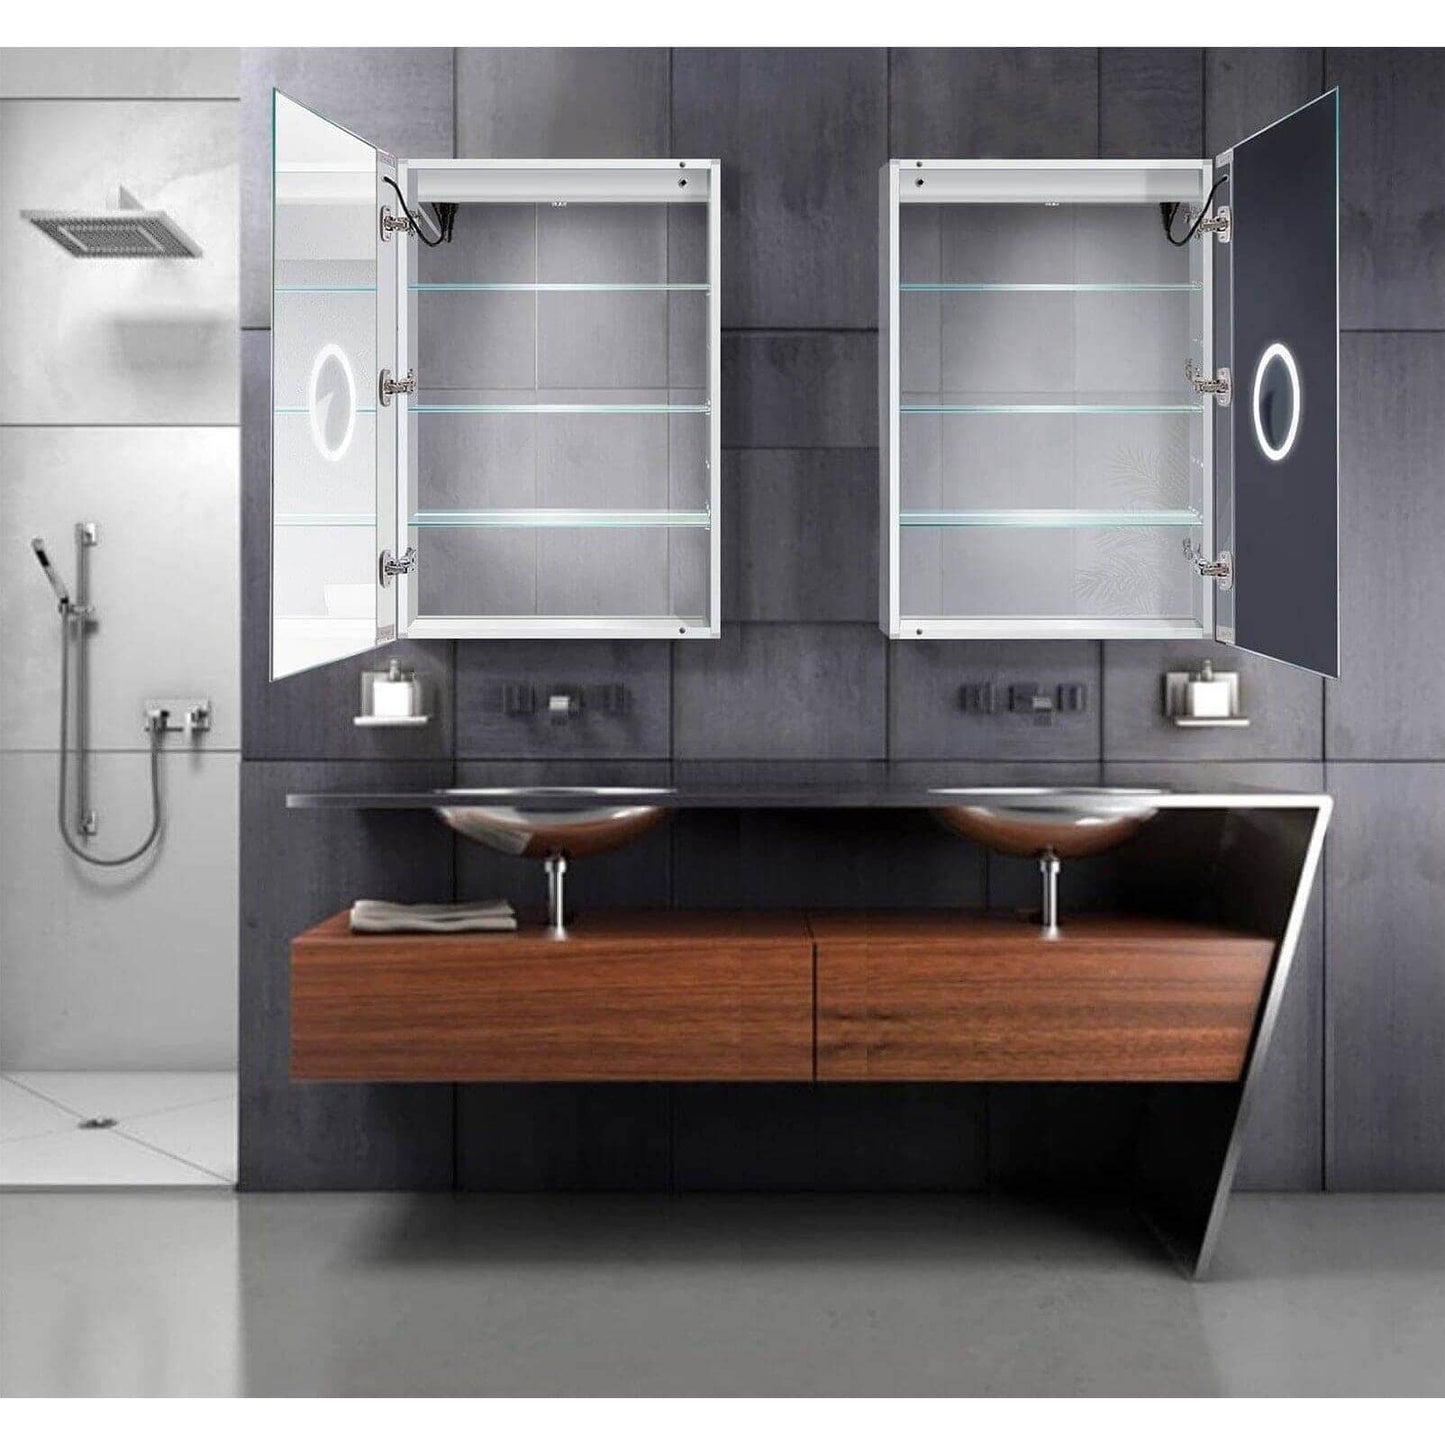 Krugg Svange 2436l and 2436r LED Medicine Cabinets with their doors open and three shelves showing